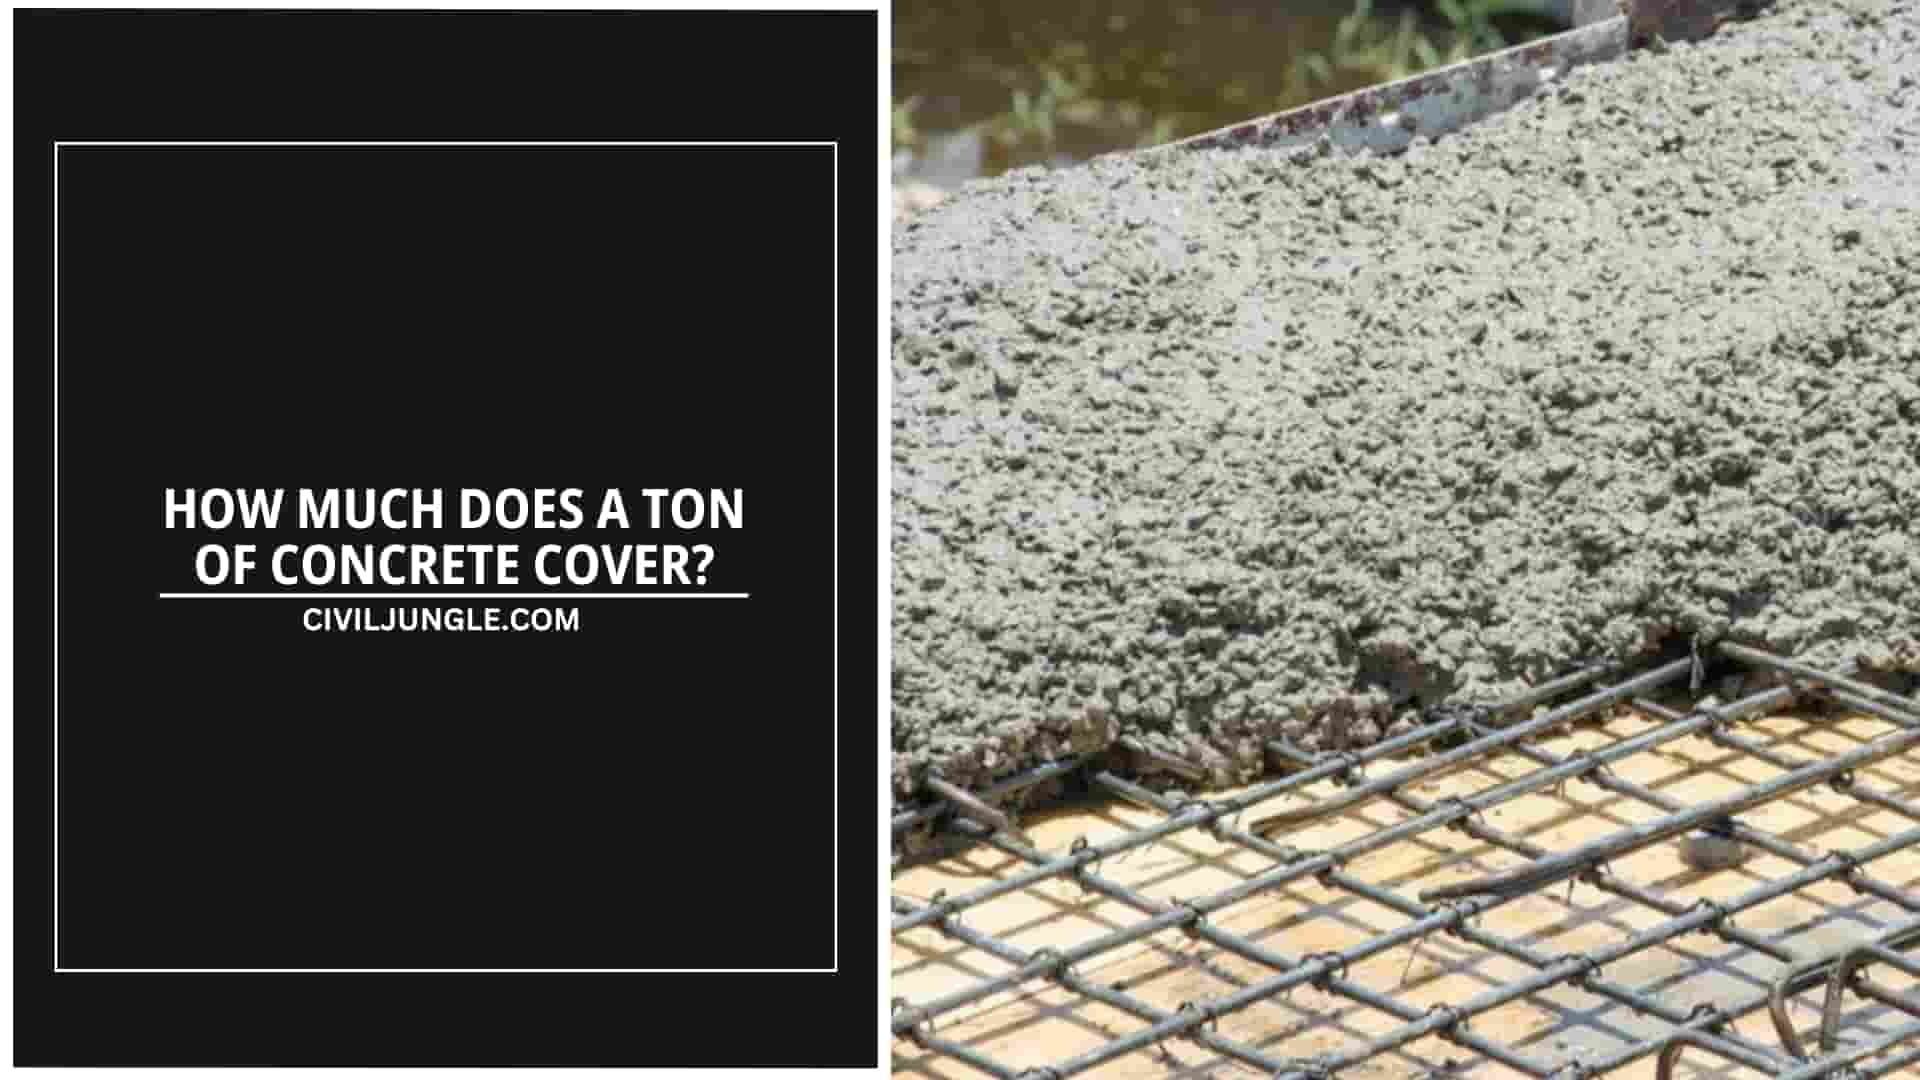 How Much Does a Ton of Concrete Cover?